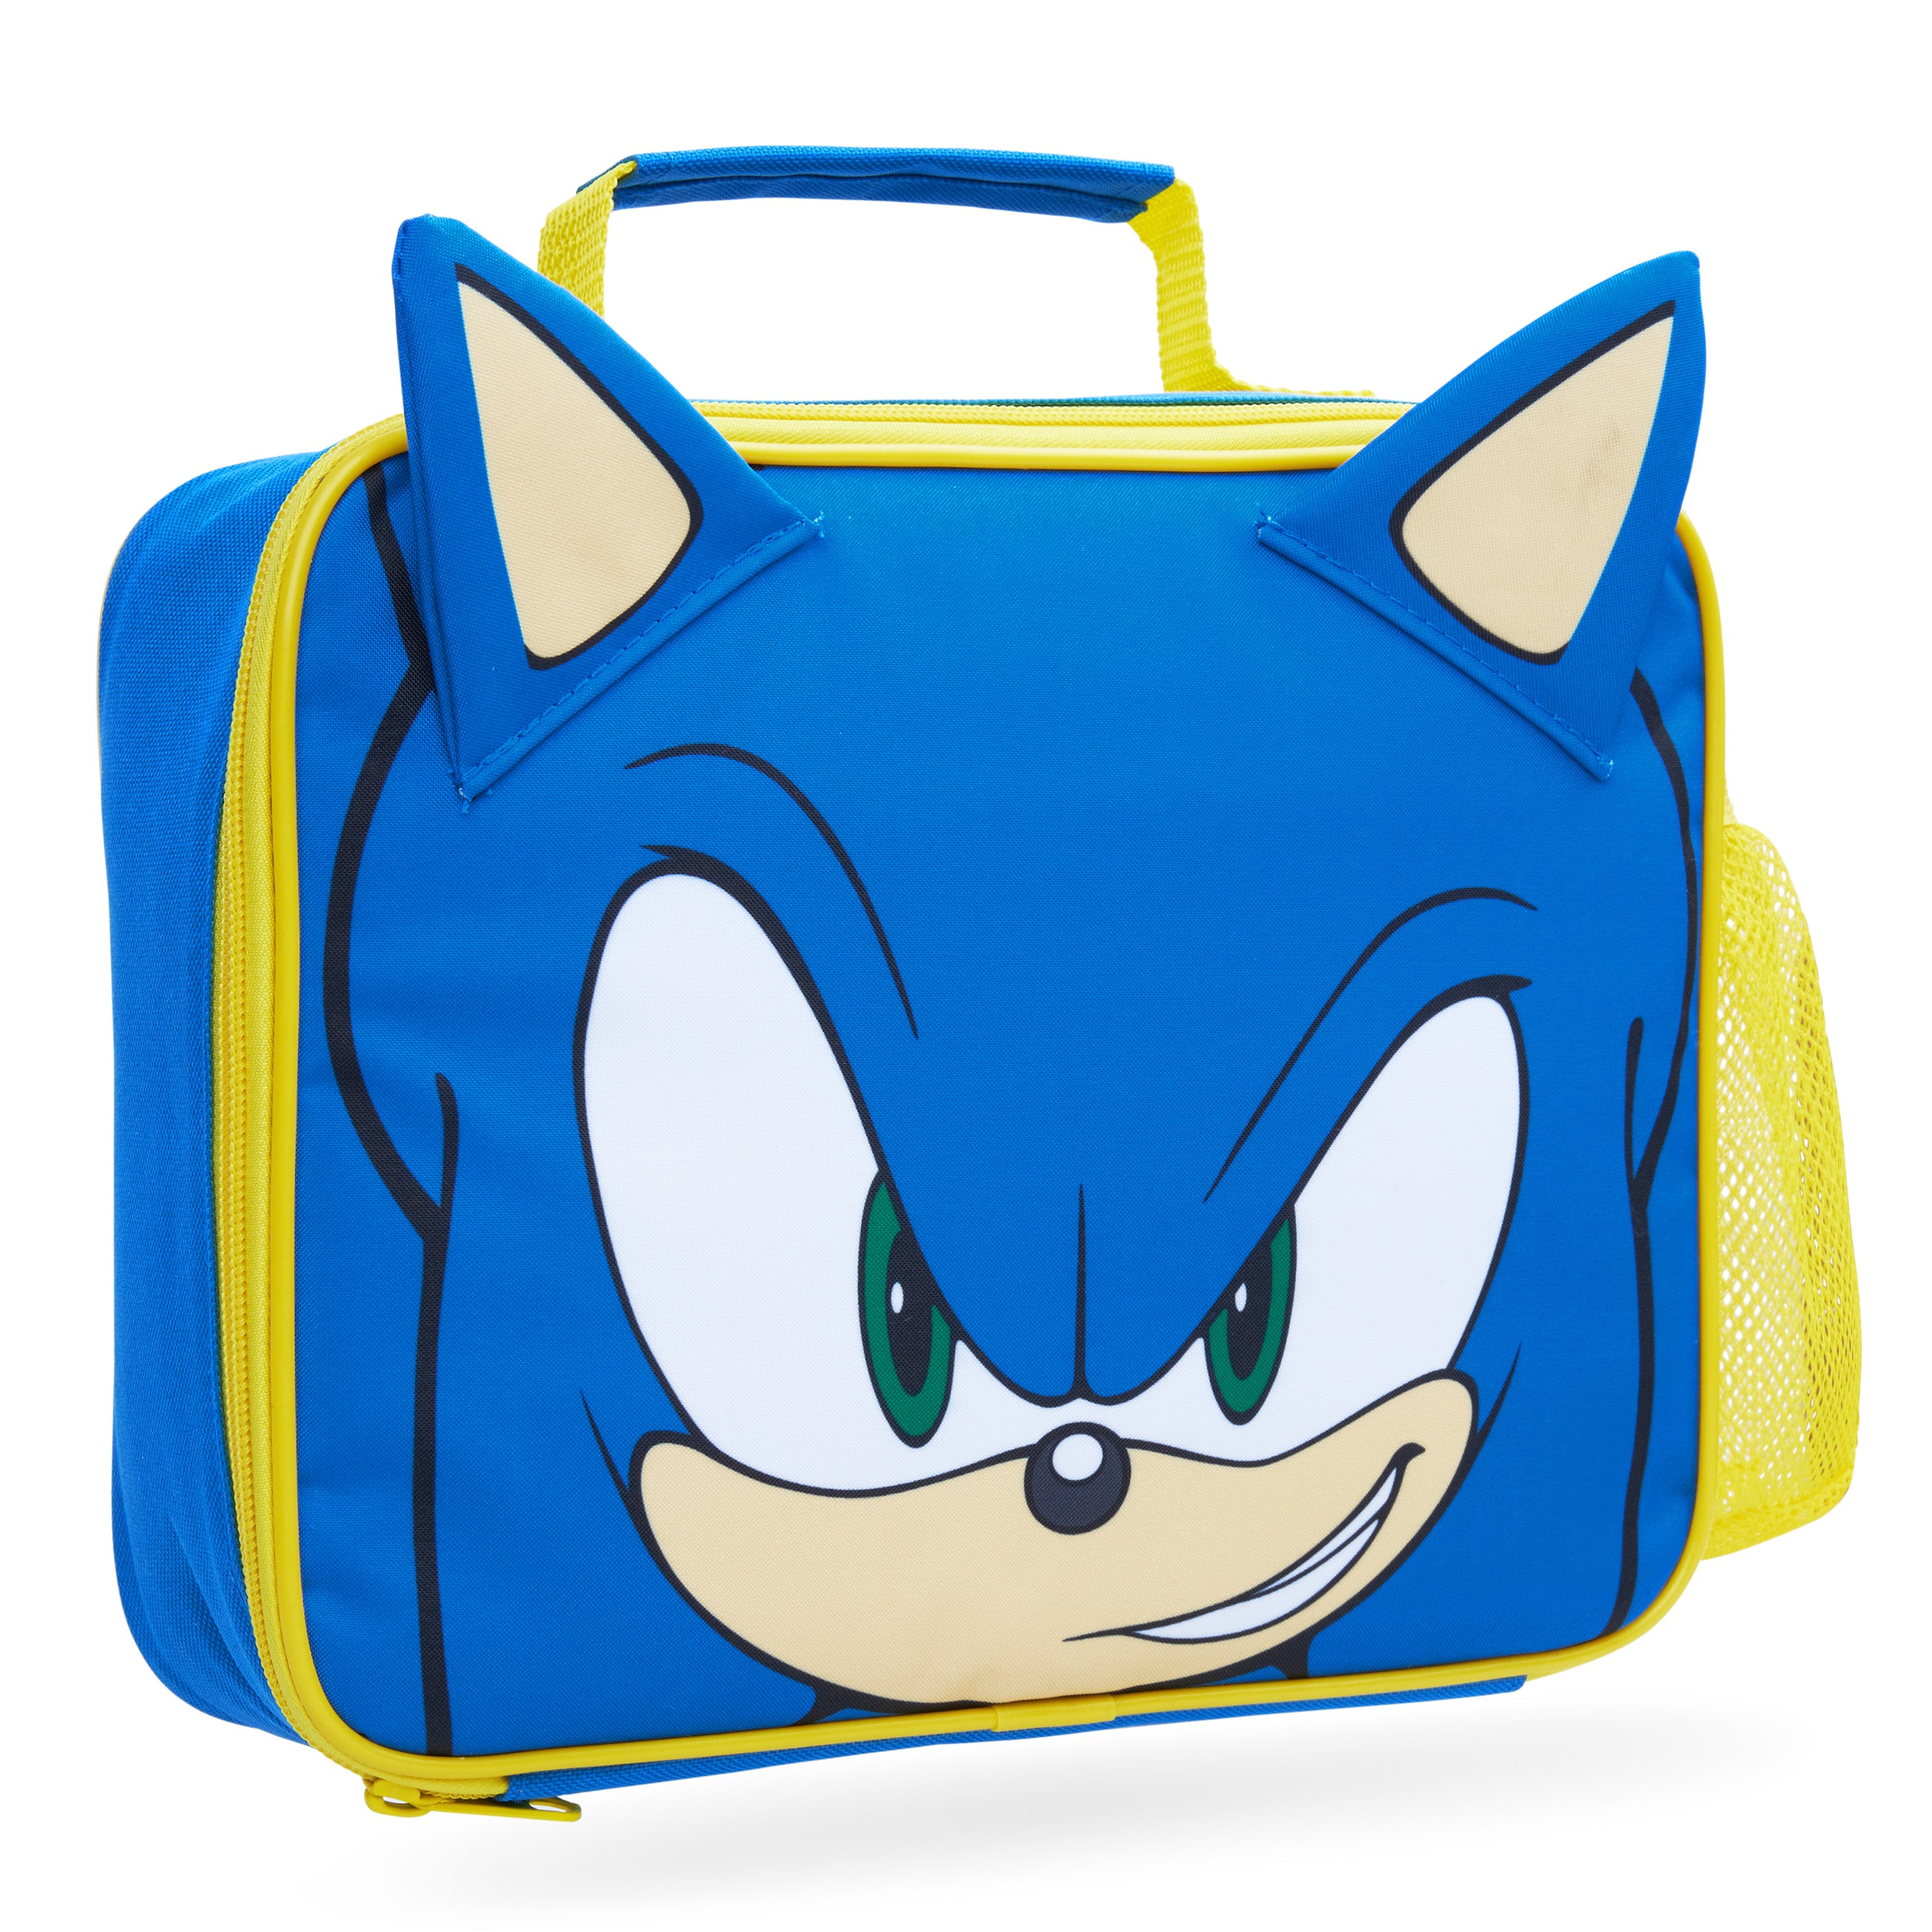 Sonic The Hedgehog Lunch Box Kids Insulated Lunch Bag for Boys (Blue/Y